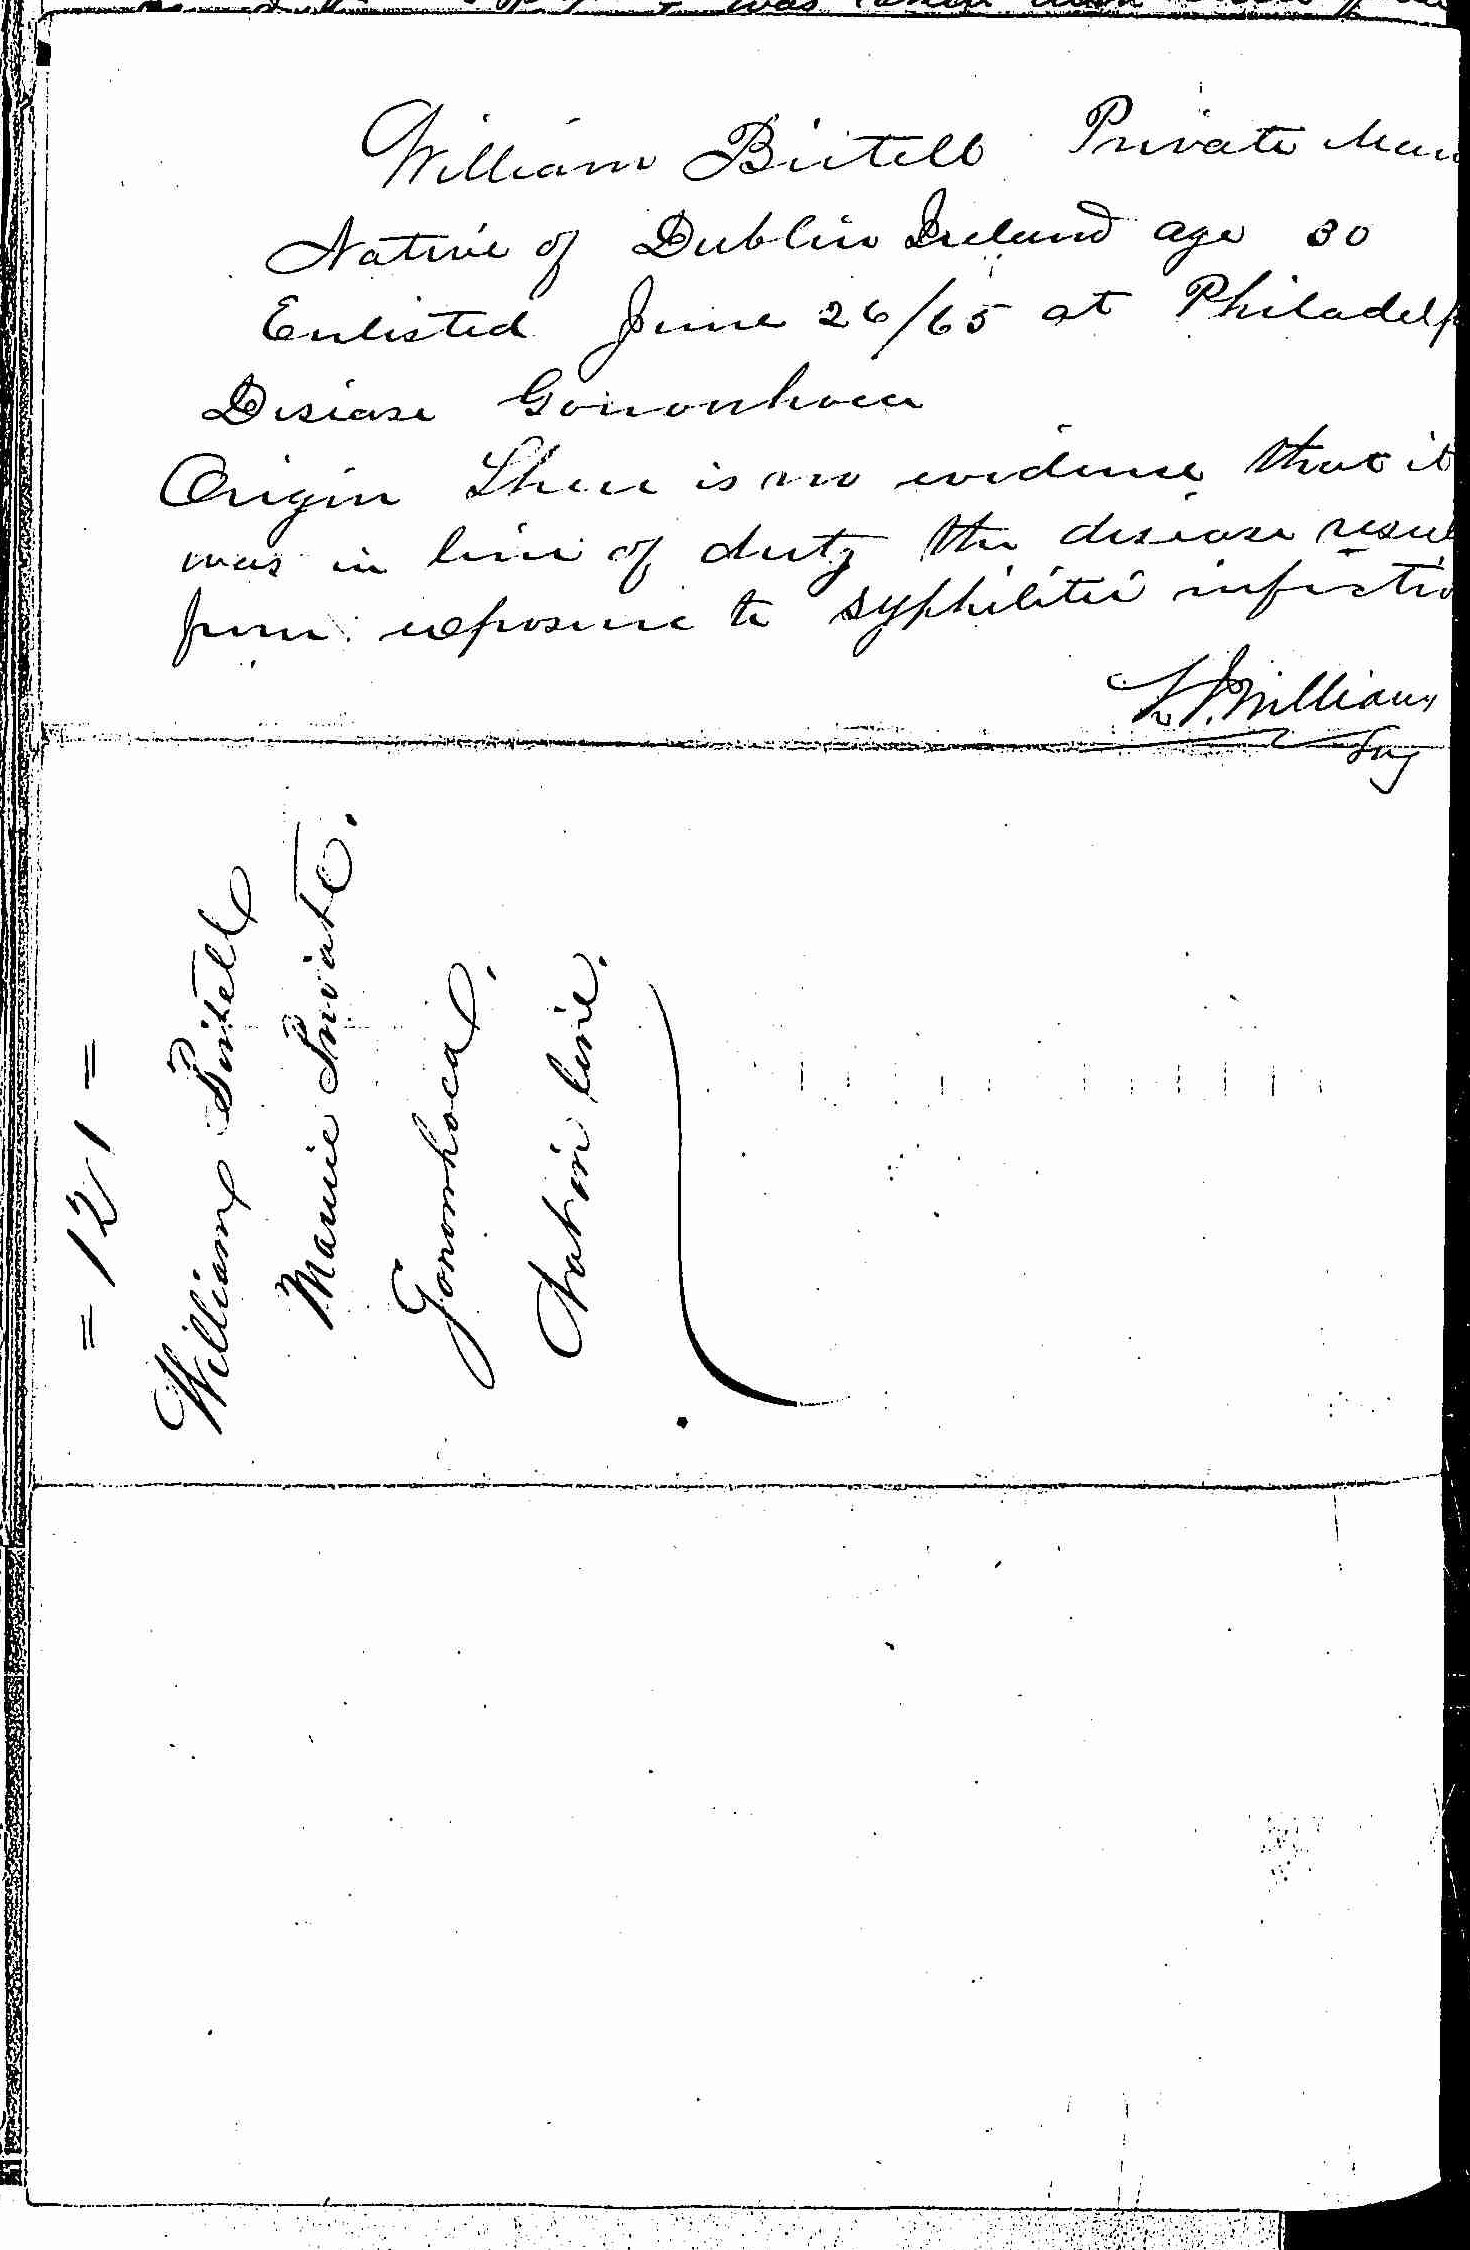 Entry for William Birtell (page 2 of 2) in the log Hospital Tickets and Case Papers - Naval Hospital - Washington, D.C. - 1866-68